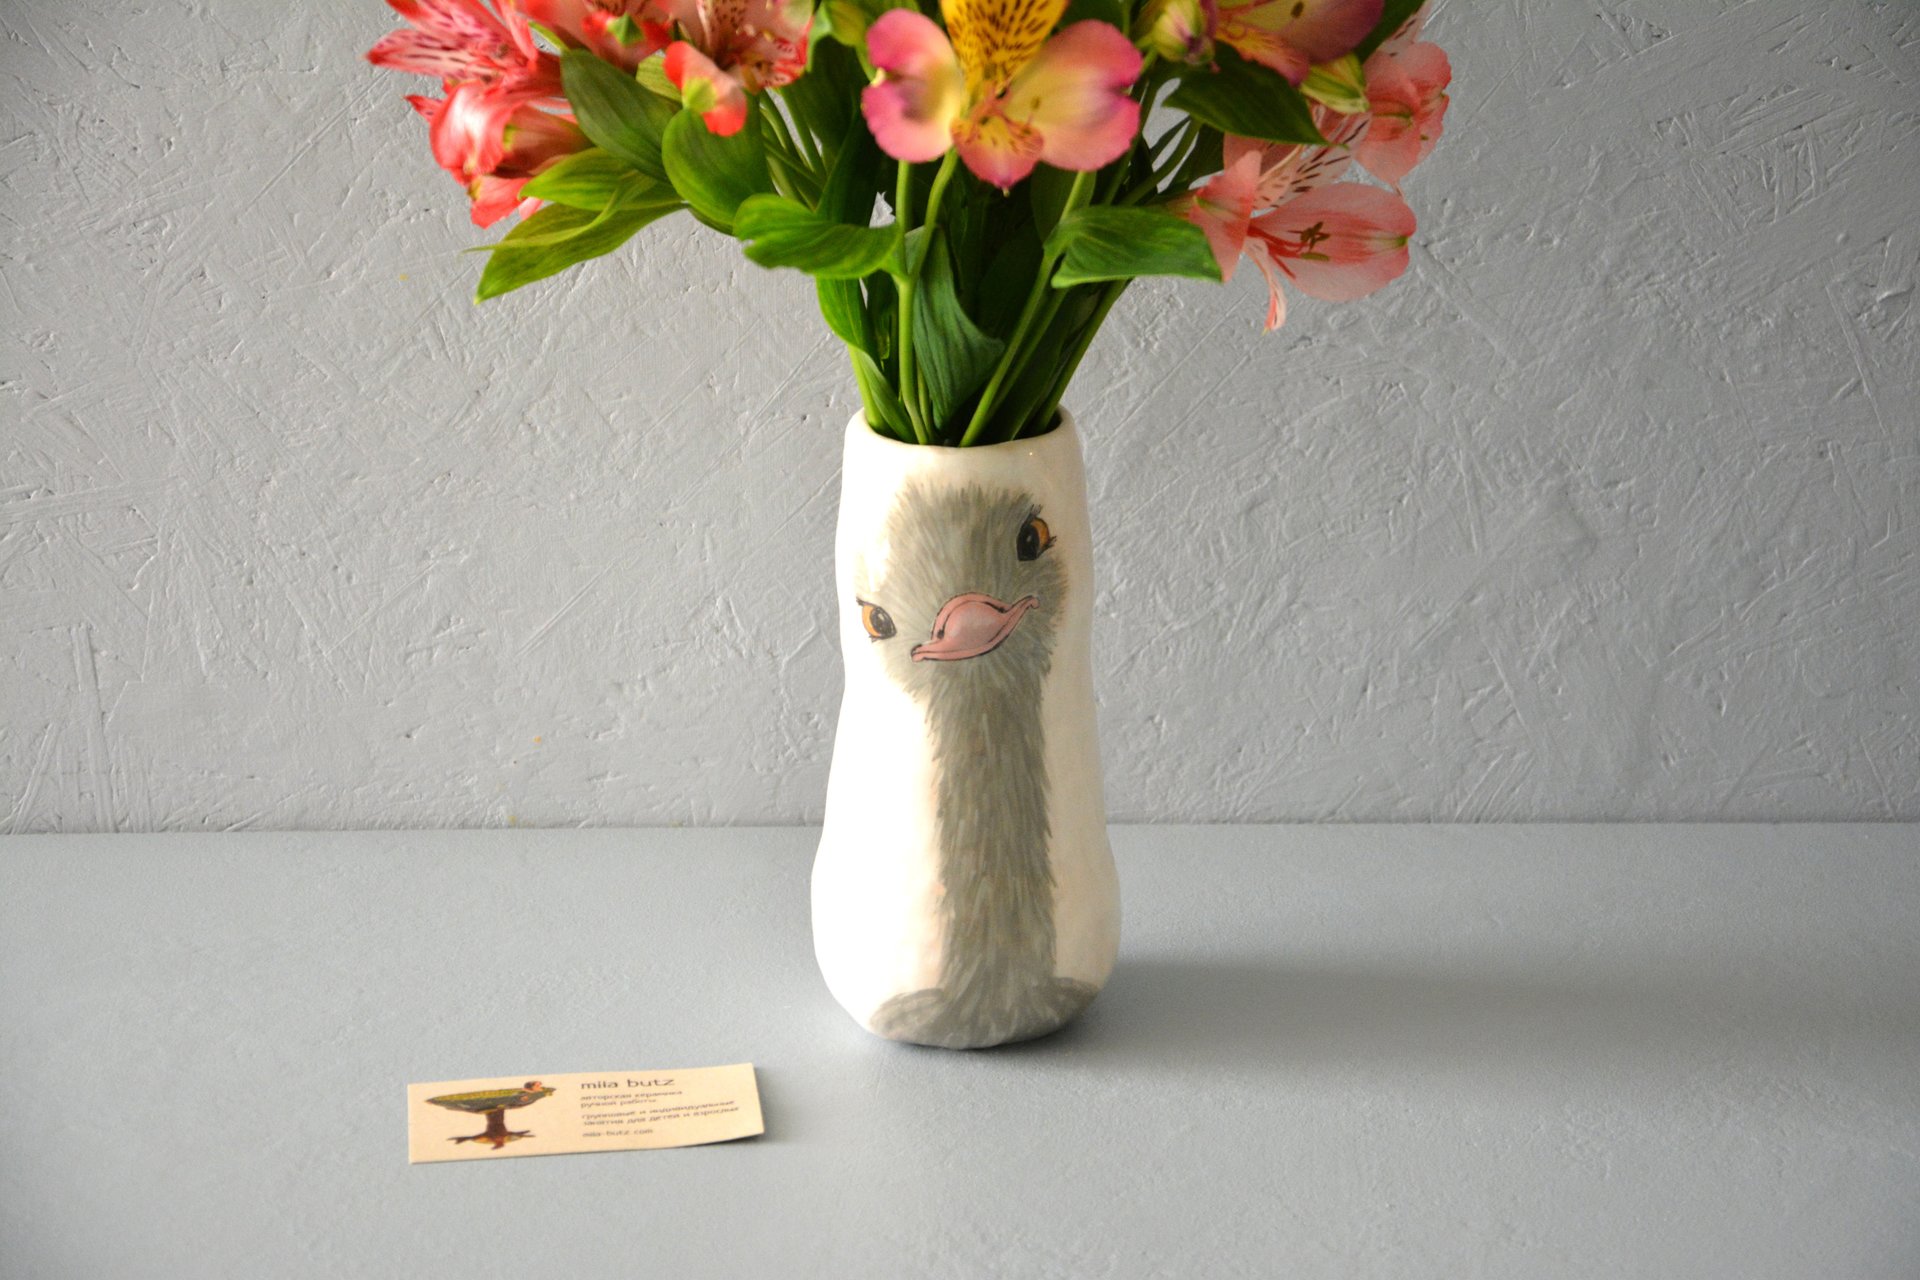 Hand-painted vase — Curious Ostrich, height - 18 cm, photo 2 of 4. 567.